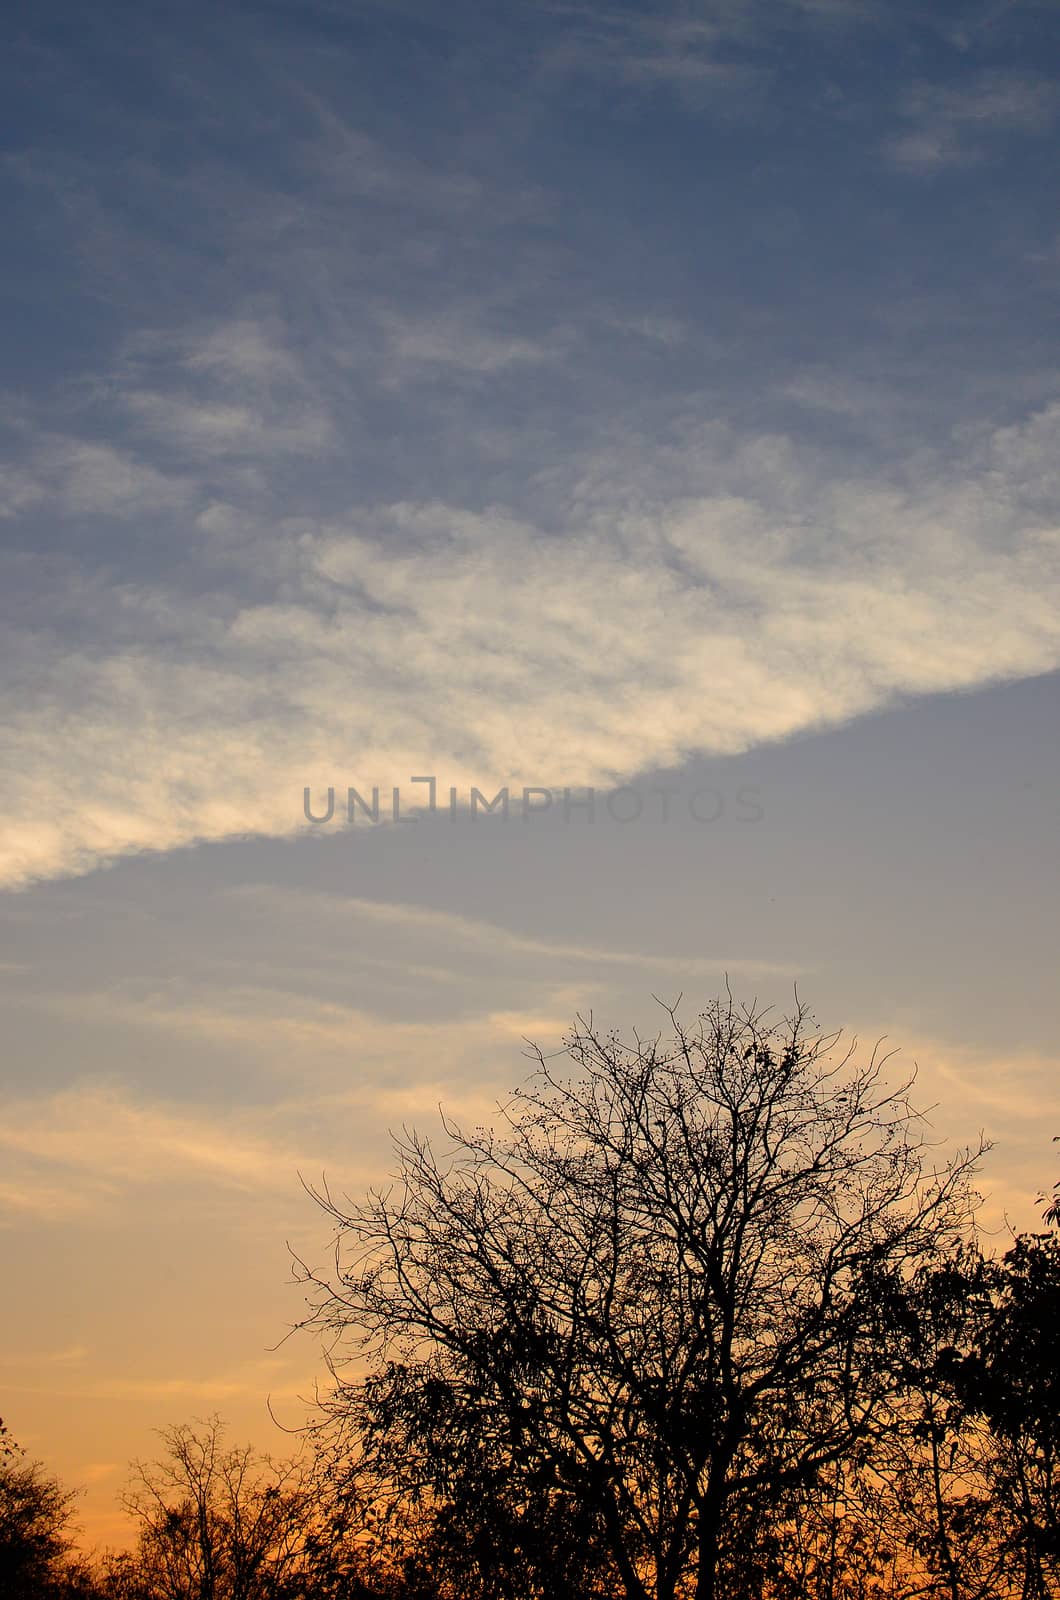 Wave cloud in sunset sky with tree silhouette